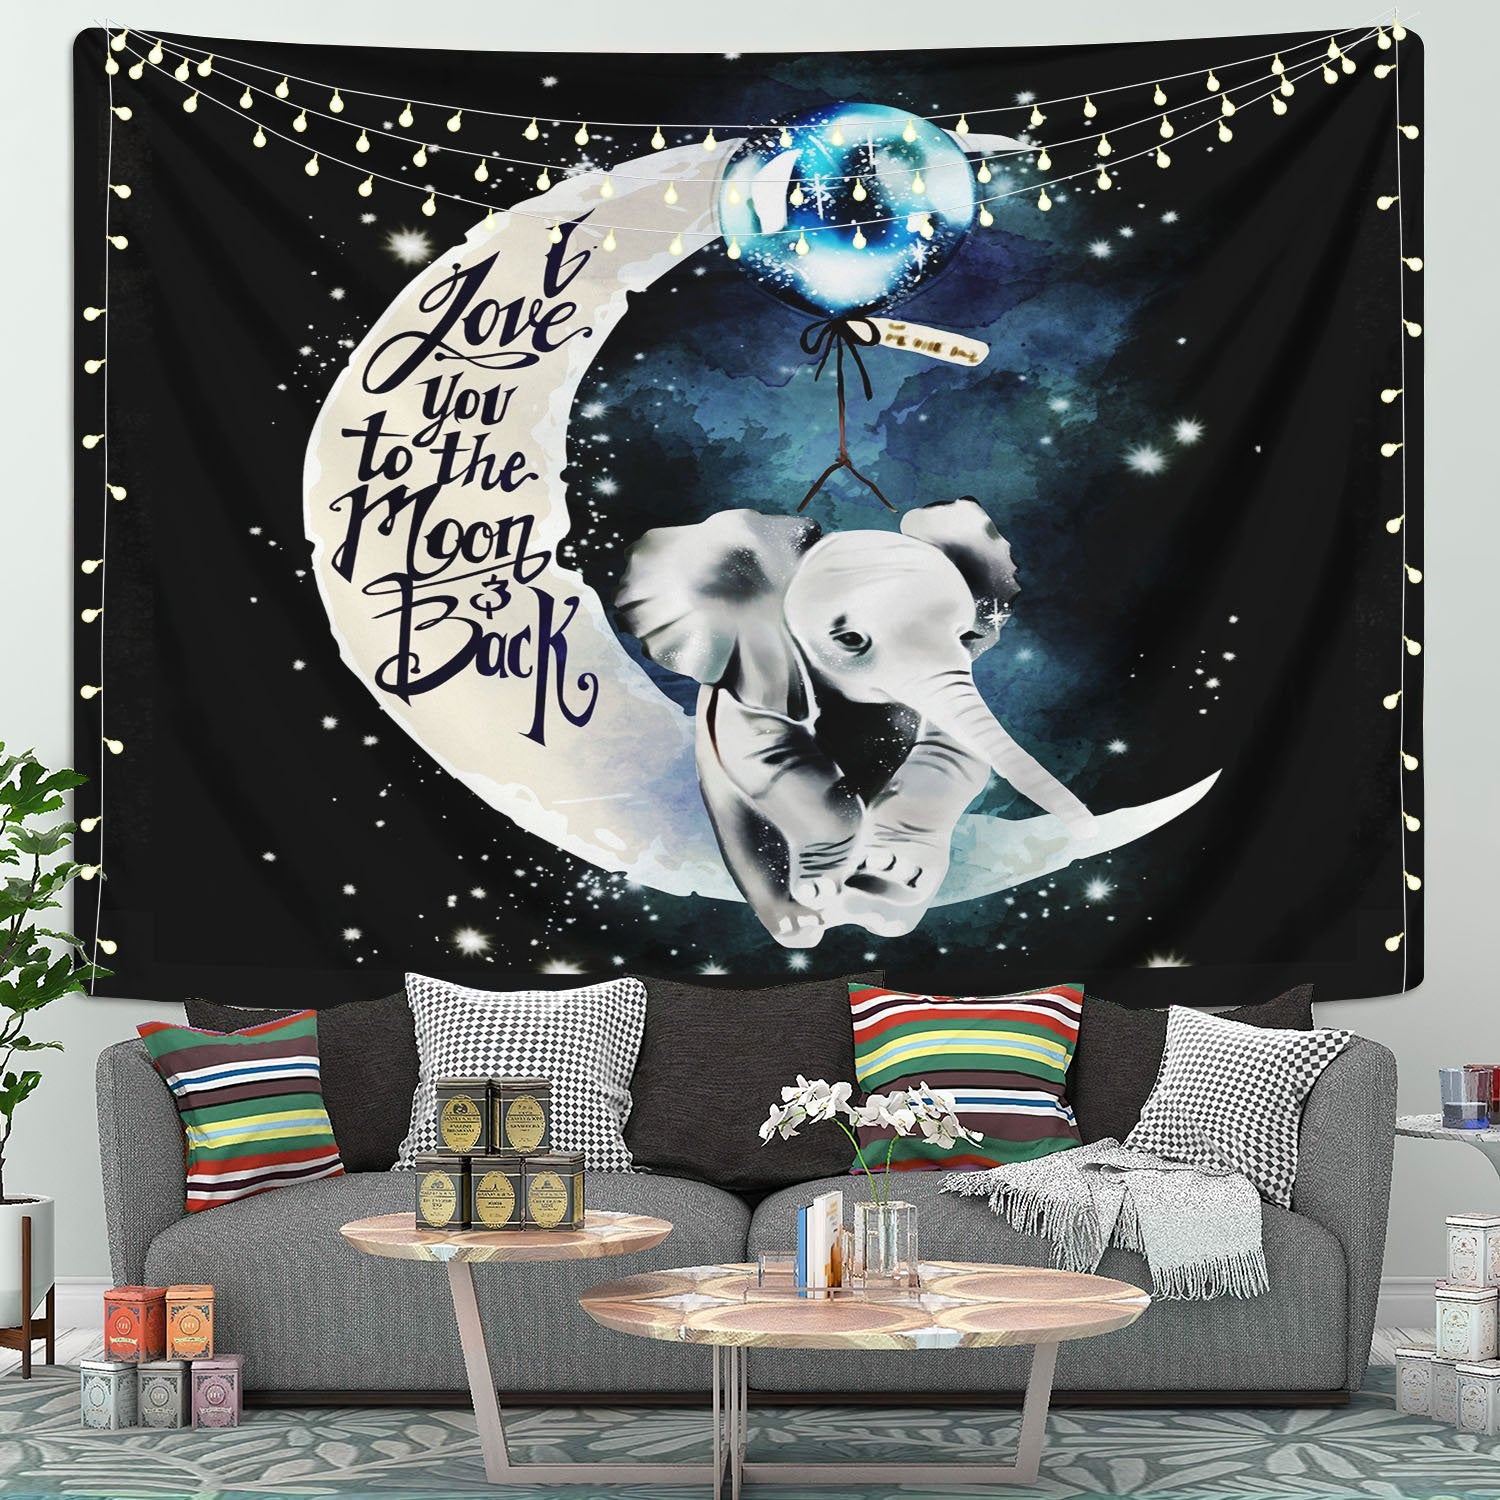 Elephant Love You To The Moon Tapestry Room Decor